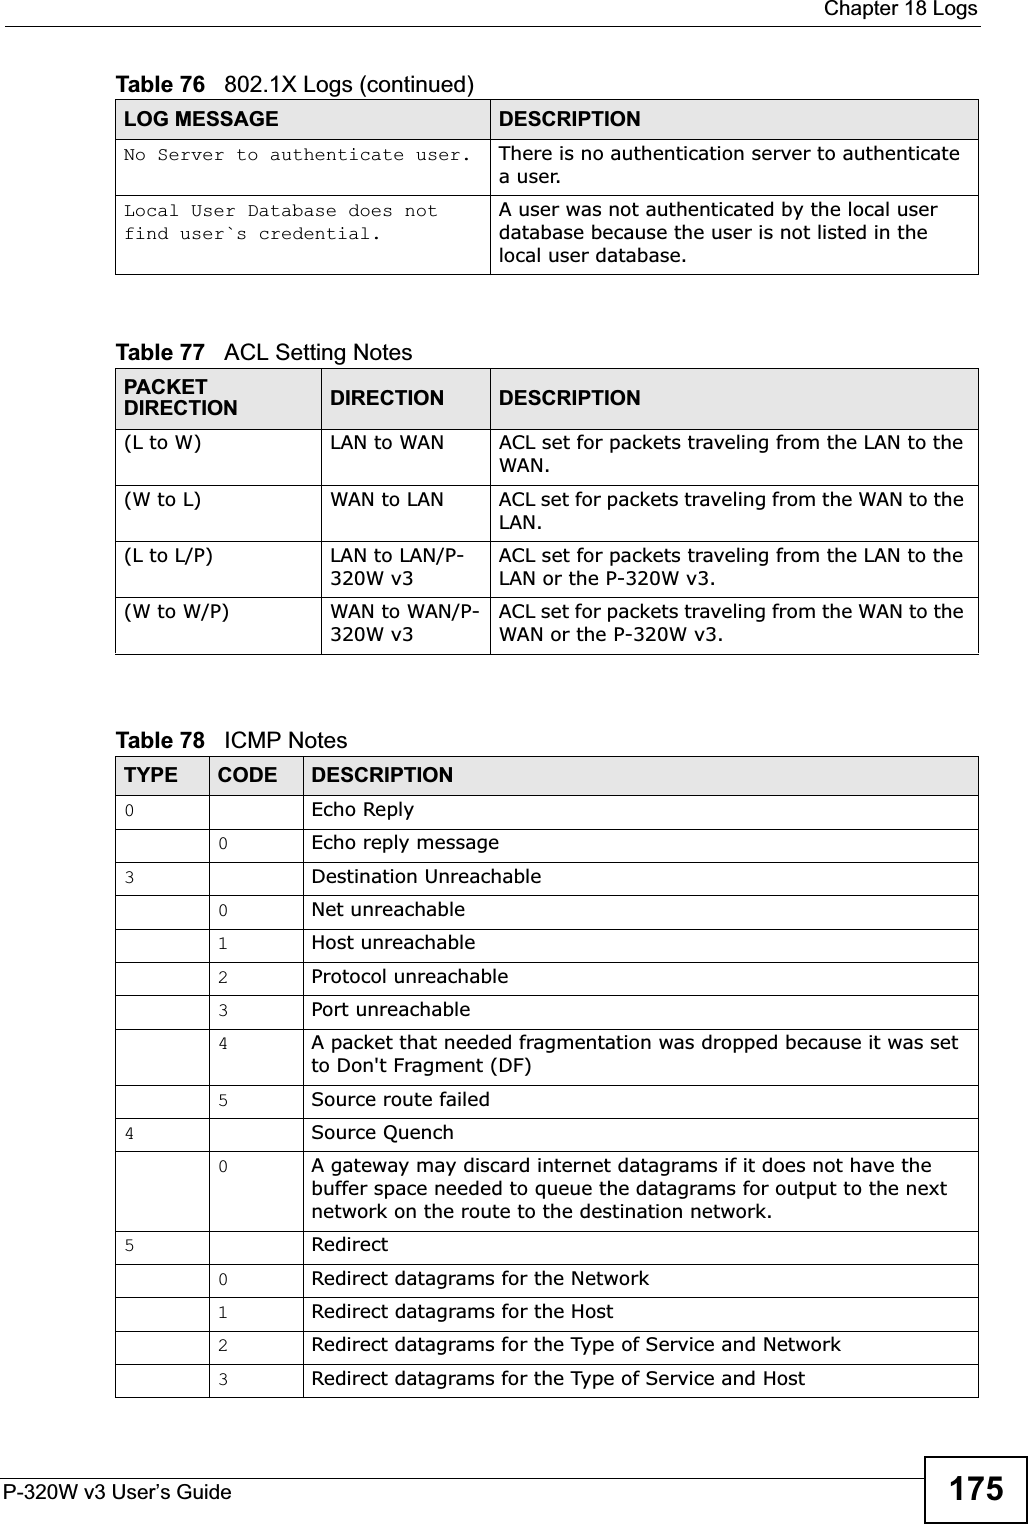  Chapter 18 LogsP-320W v3 User’s Guide 175No Server to authenticate user. There is no authentication server to authenticate a user.Local User Database does not find user`s credential.A user was not authenticated by the local user database because the user is not listed in the local user database.Table 77   ACL Setting NotesPACKET DIRECTION DIRECTION DESCRIPTION(L to W) LAN to WAN ACL set for packets traveling from the LAN to the WAN.(W to L) WAN to LAN ACL set for packets traveling from the WAN to the LAN.(L to L/P) LAN to LAN/P-320W v3ACL set for packets traveling from the LAN to the LAN or the P-320W v3.(W to W/P) WAN to WAN/P-320W v3ACL set for packets traveling from the WAN to the WAN or the P-320W v3.Table 78   ICMP NotesTYPE CODE DESCRIPTION0Echo Reply0Echo reply message3Destination Unreachable0Net unreachable1Host unreachable2Protocol unreachable3Port unreachable4A packet that needed fragmentation was dropped because it was set to Don&apos;t Fragment (DF)5Source route failed4Source Quench0A gateway may discard internet datagrams if it does not have the buffer space needed to queue the datagrams for output to the next network on the route to the destination network.5Redirect0Redirect datagrams for the Network1Redirect datagrams for the Host2Redirect datagrams for the Type of Service and Network3Redirect datagrams for the Type of Service and HostTable 76   802.1X Logs (continued)LOG MESSAGE DESCRIPTION